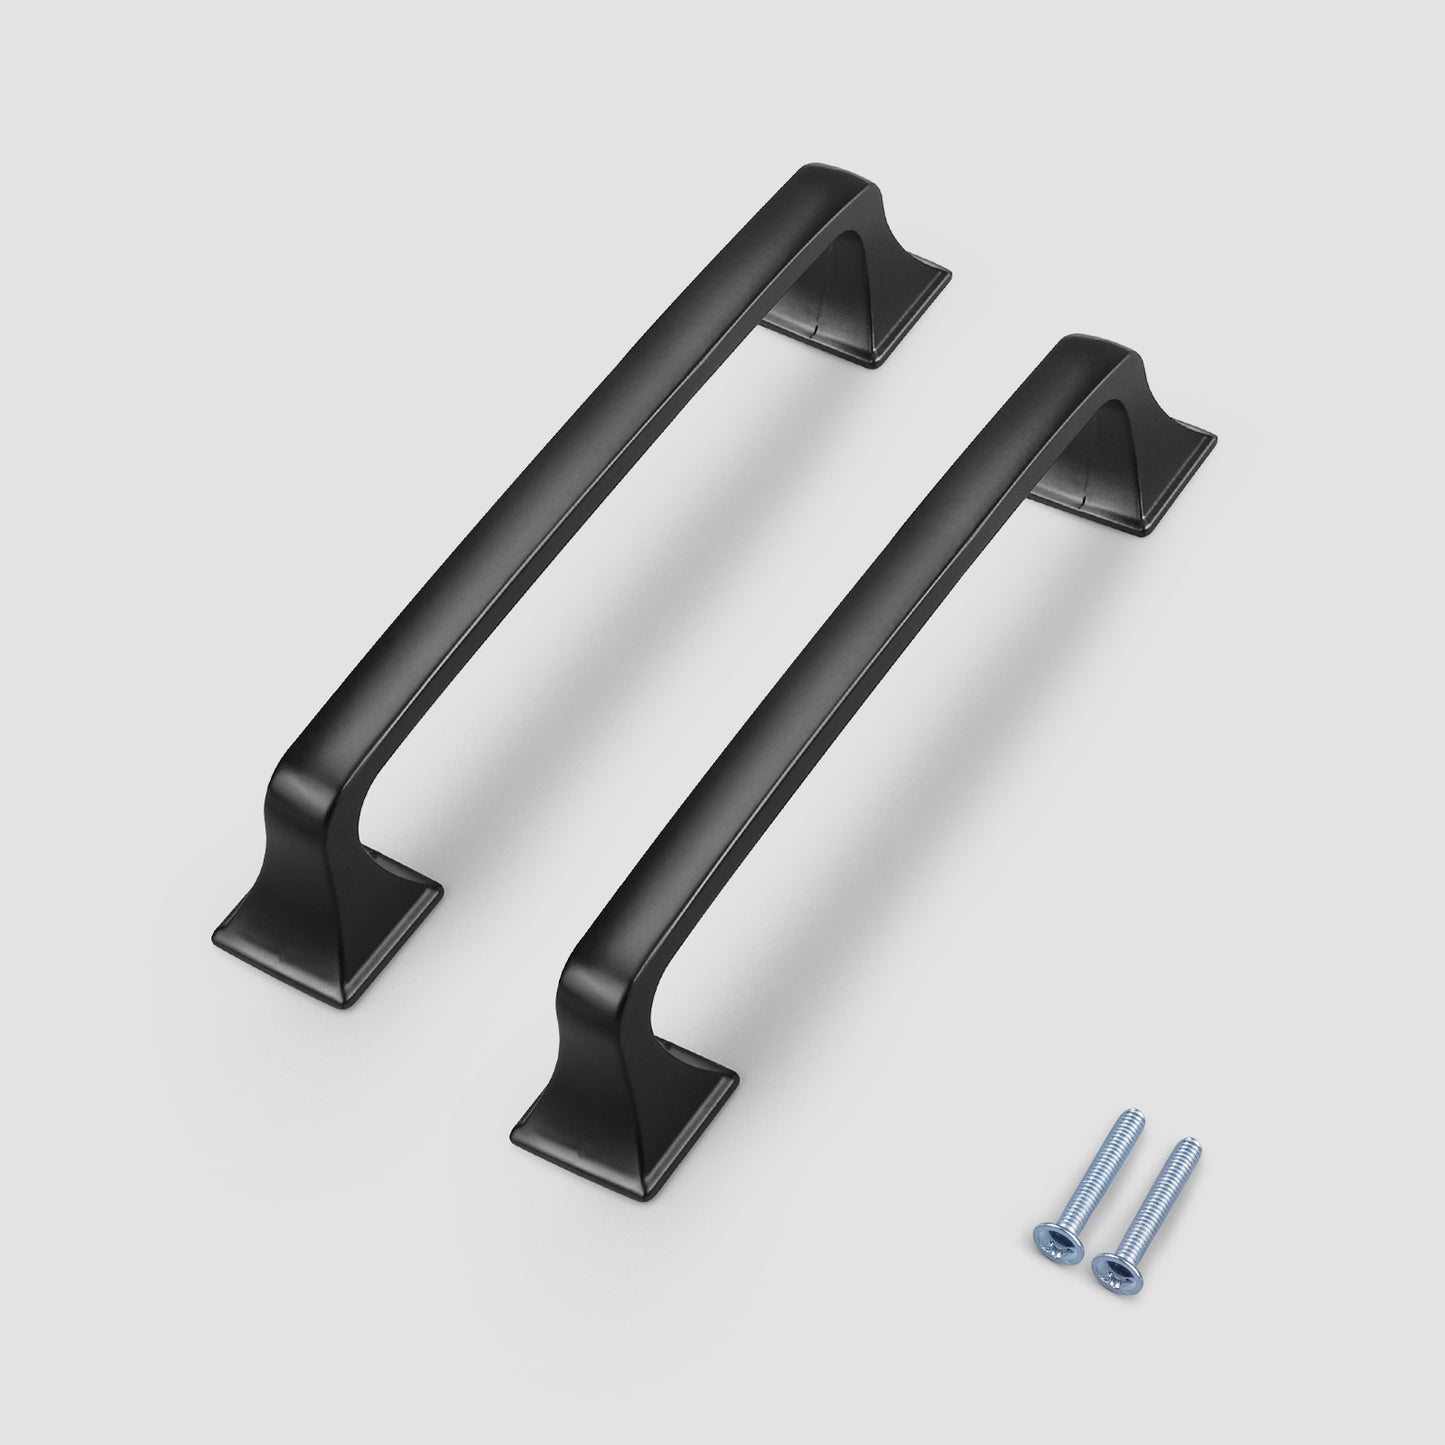 Black Decorative Cabinet Pulls Kitchen/Drawer Handles with Square Foot - Hole Spacing for 3-3/4", 5'' - PD2096BK